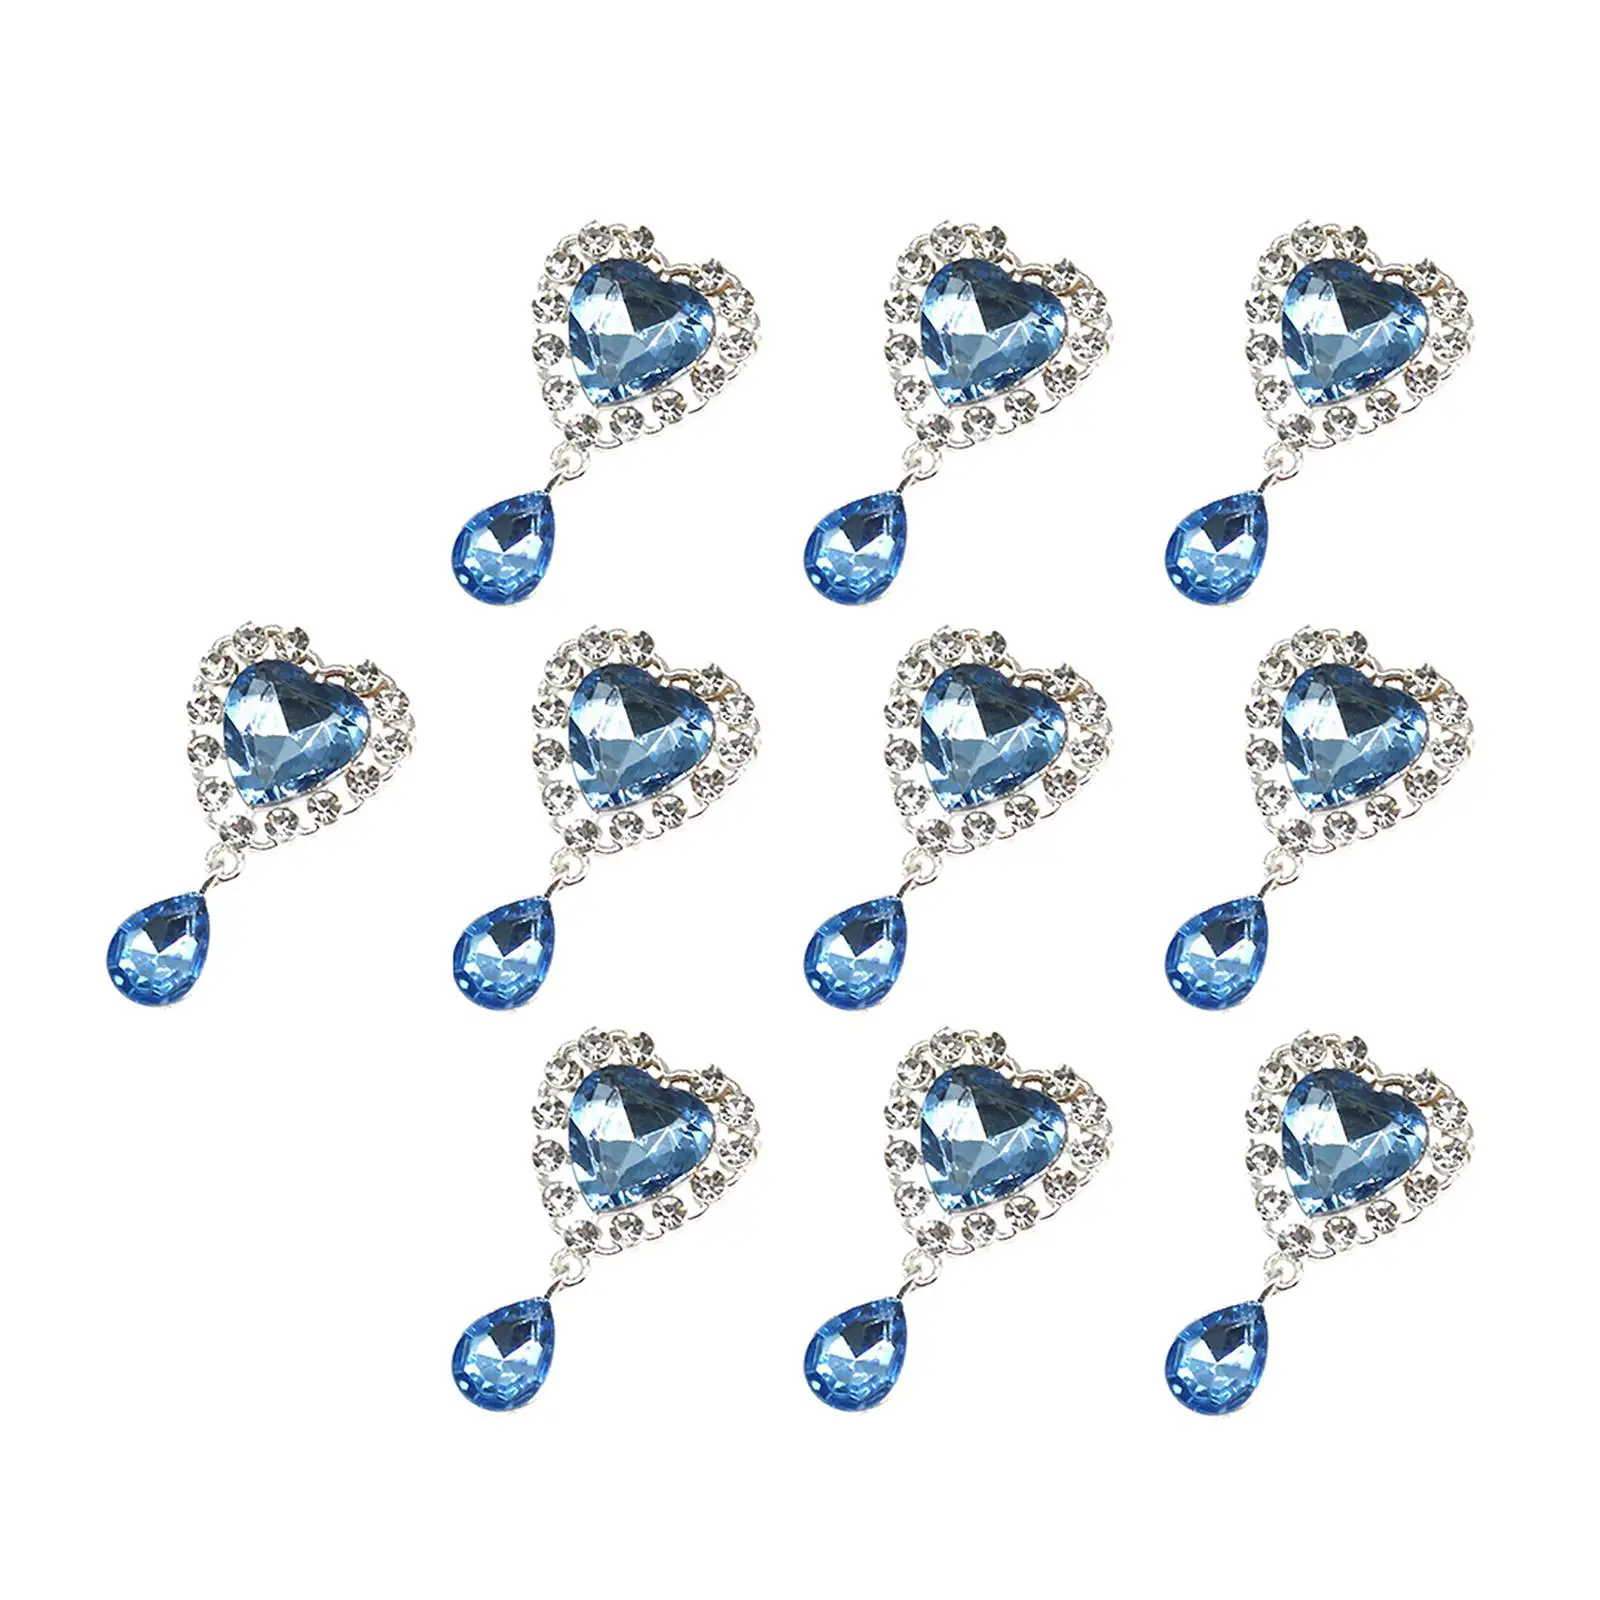 10x Heart Rhinestone Buttons Alloy Heart Pendant Rhinestone Charms for DIY Crafts Wedding Bouquet Jewelry Making Supplies